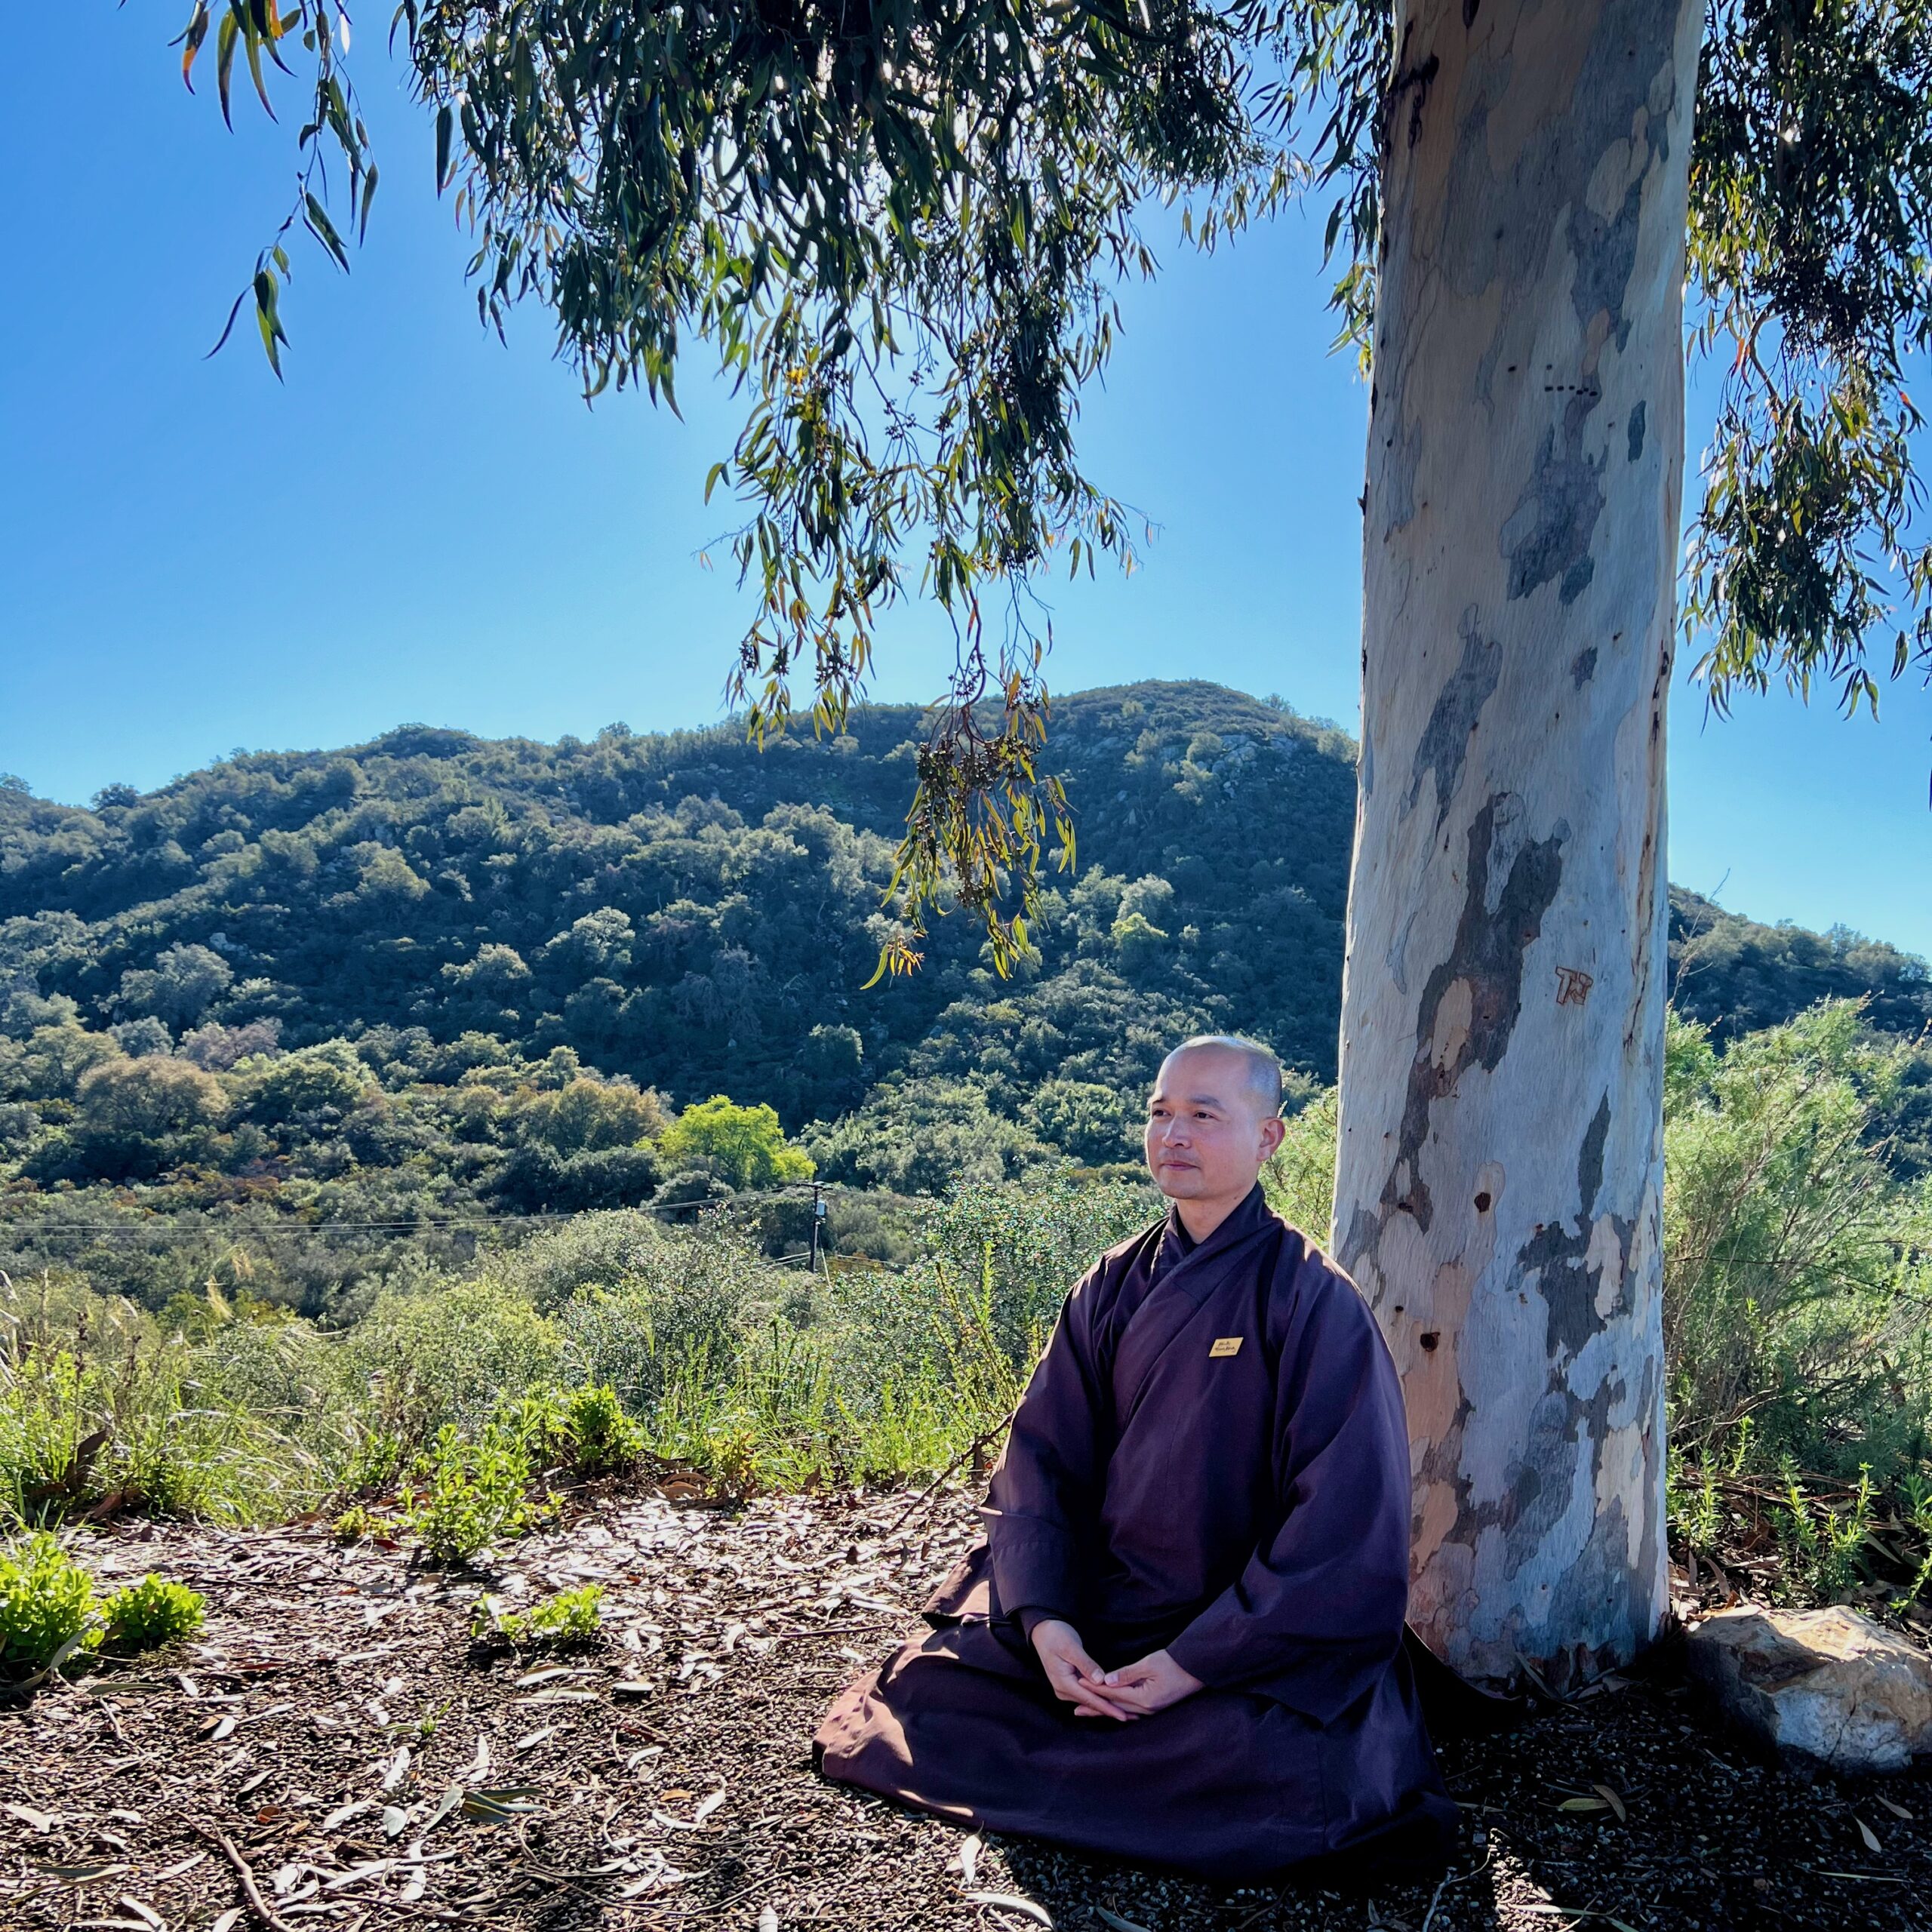 Thay Phap Xu sitting under a tree with the mountains and blue sky in the background